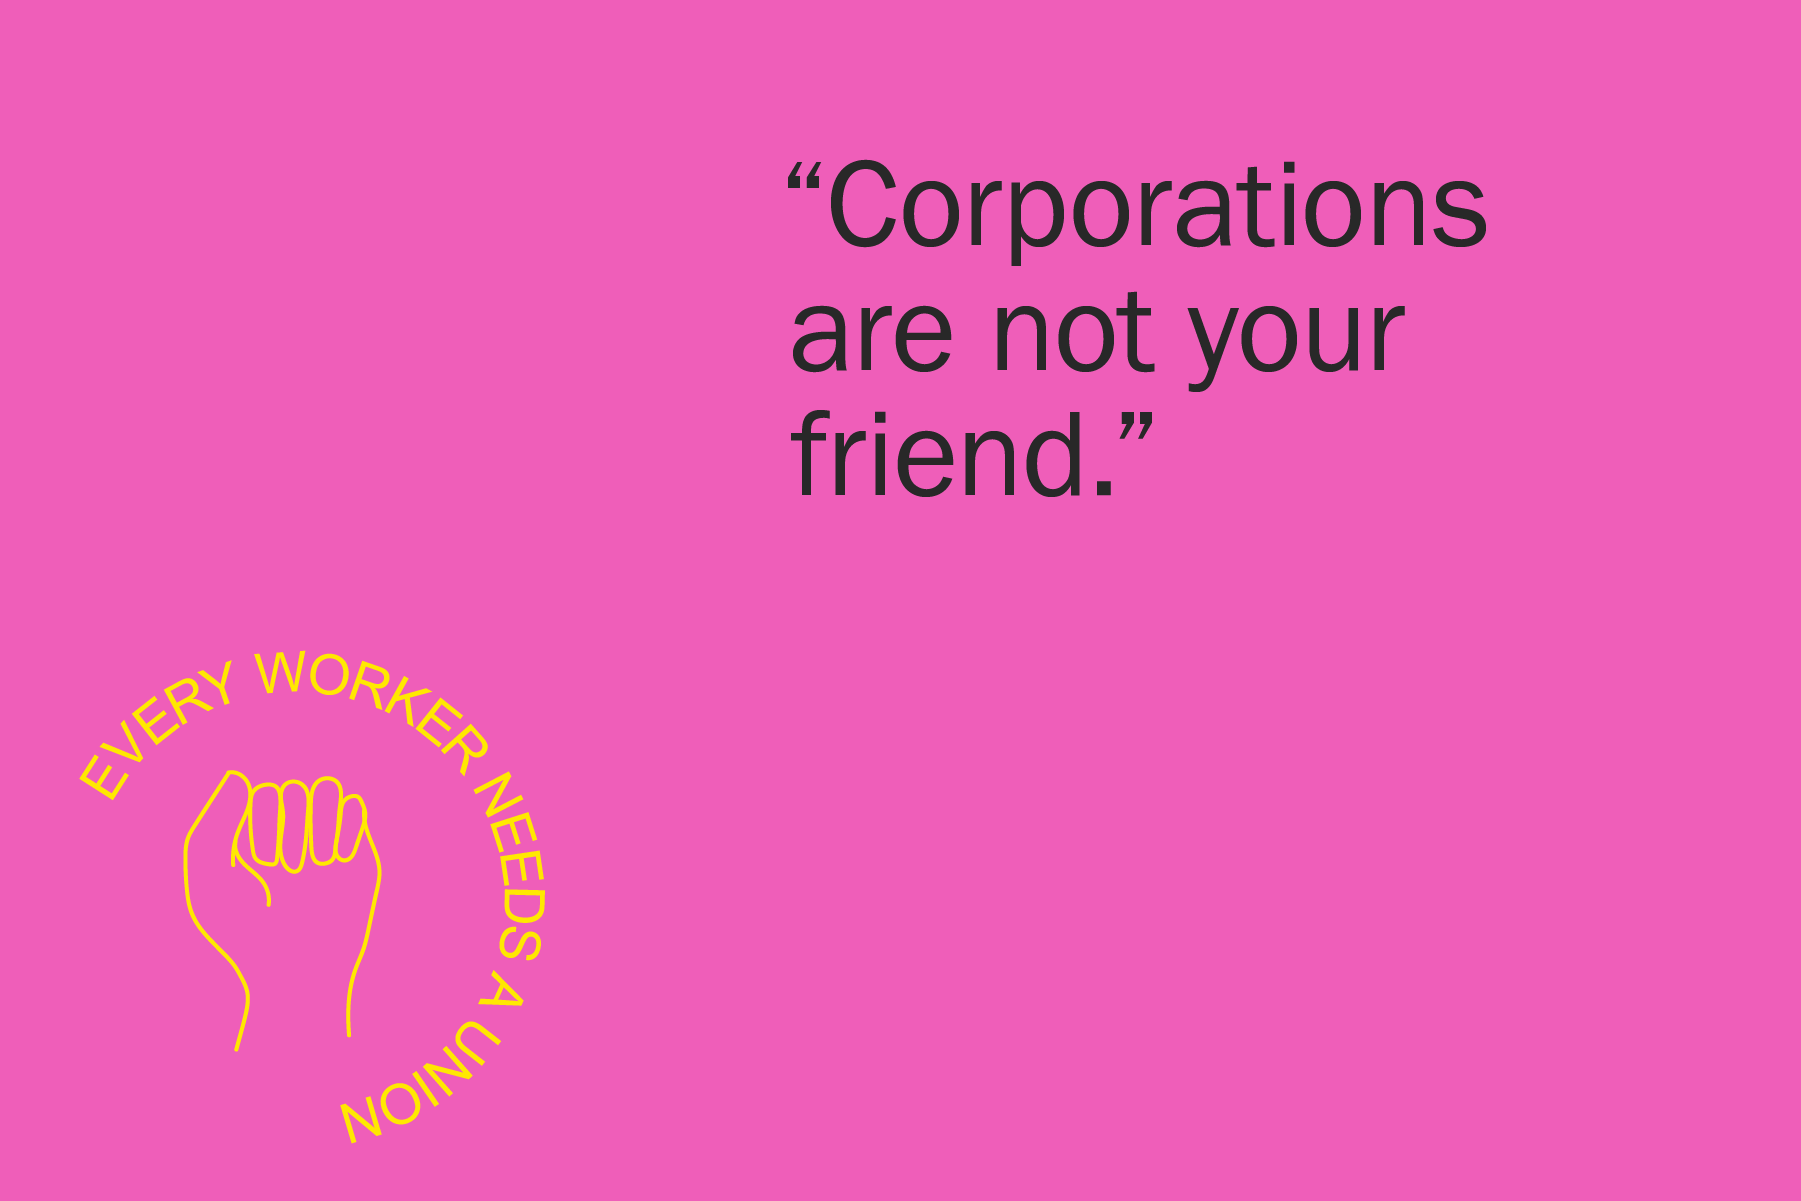 Corporations are not your friend.